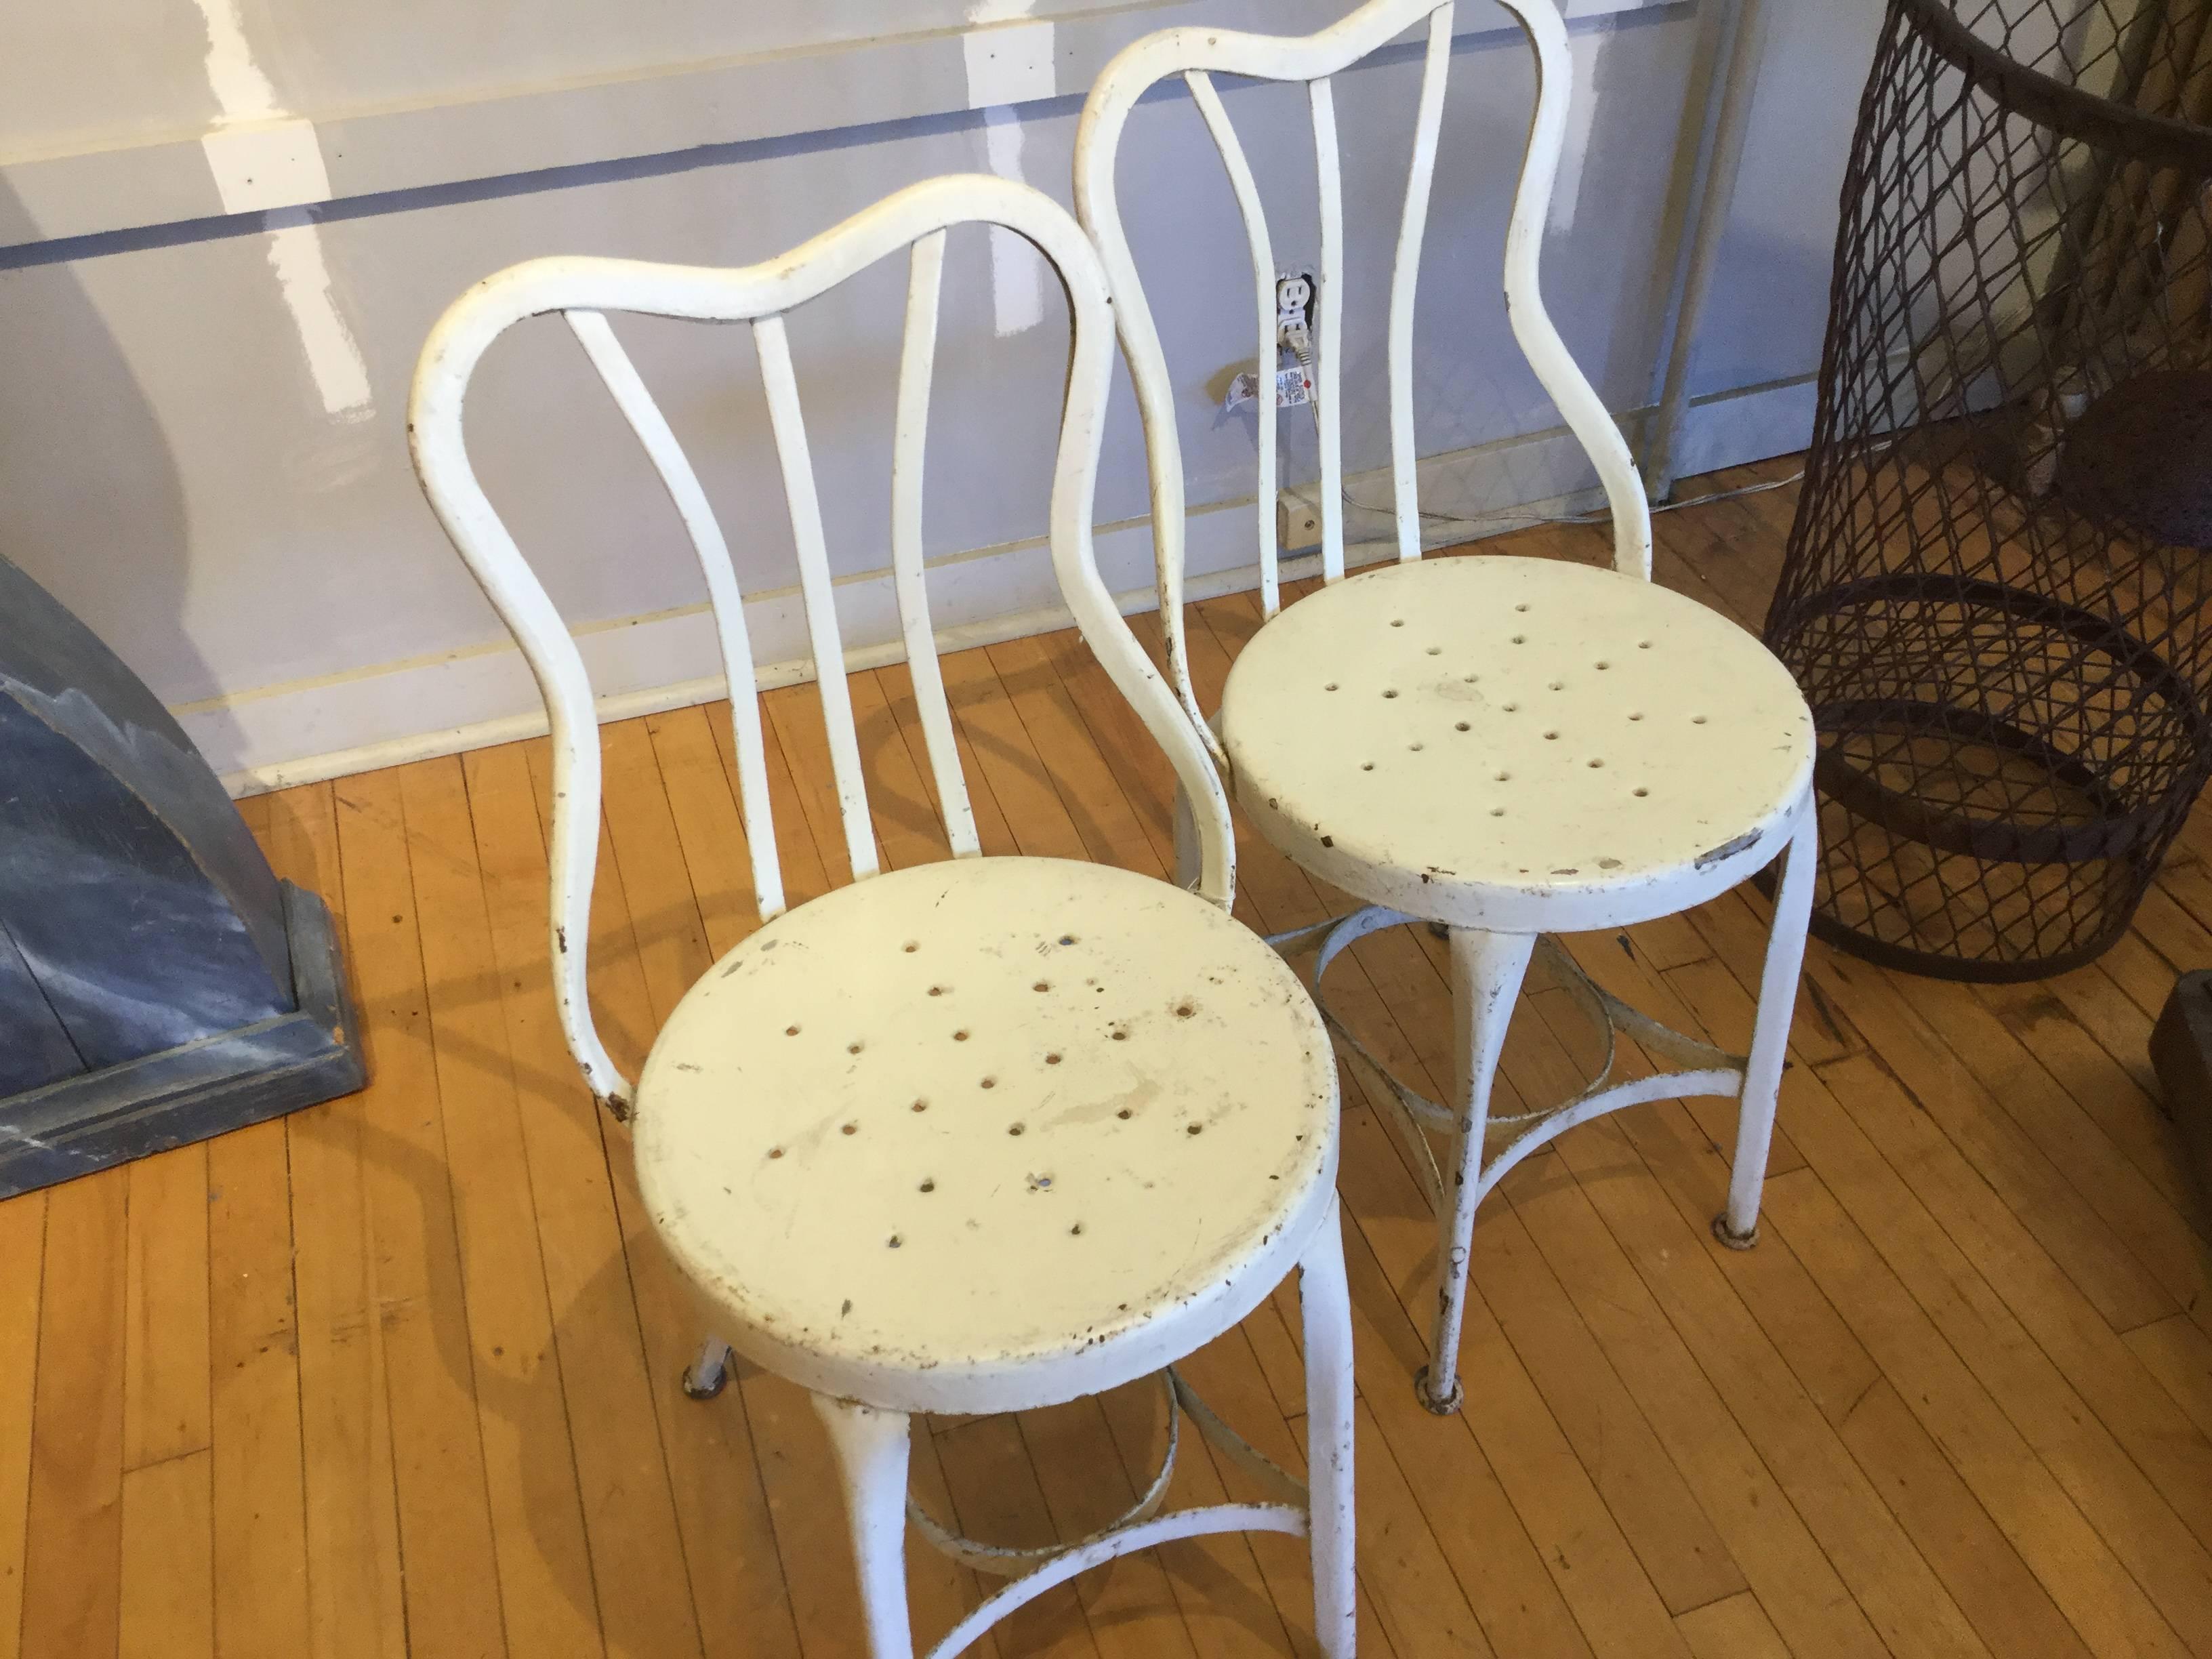 These are my favorite chairs. Made by the Toledo company in Toledo, Ohio, circa 1900. There are several versions of these chairs. These have steel seats with perforations. Some had wooden seats with perforations.